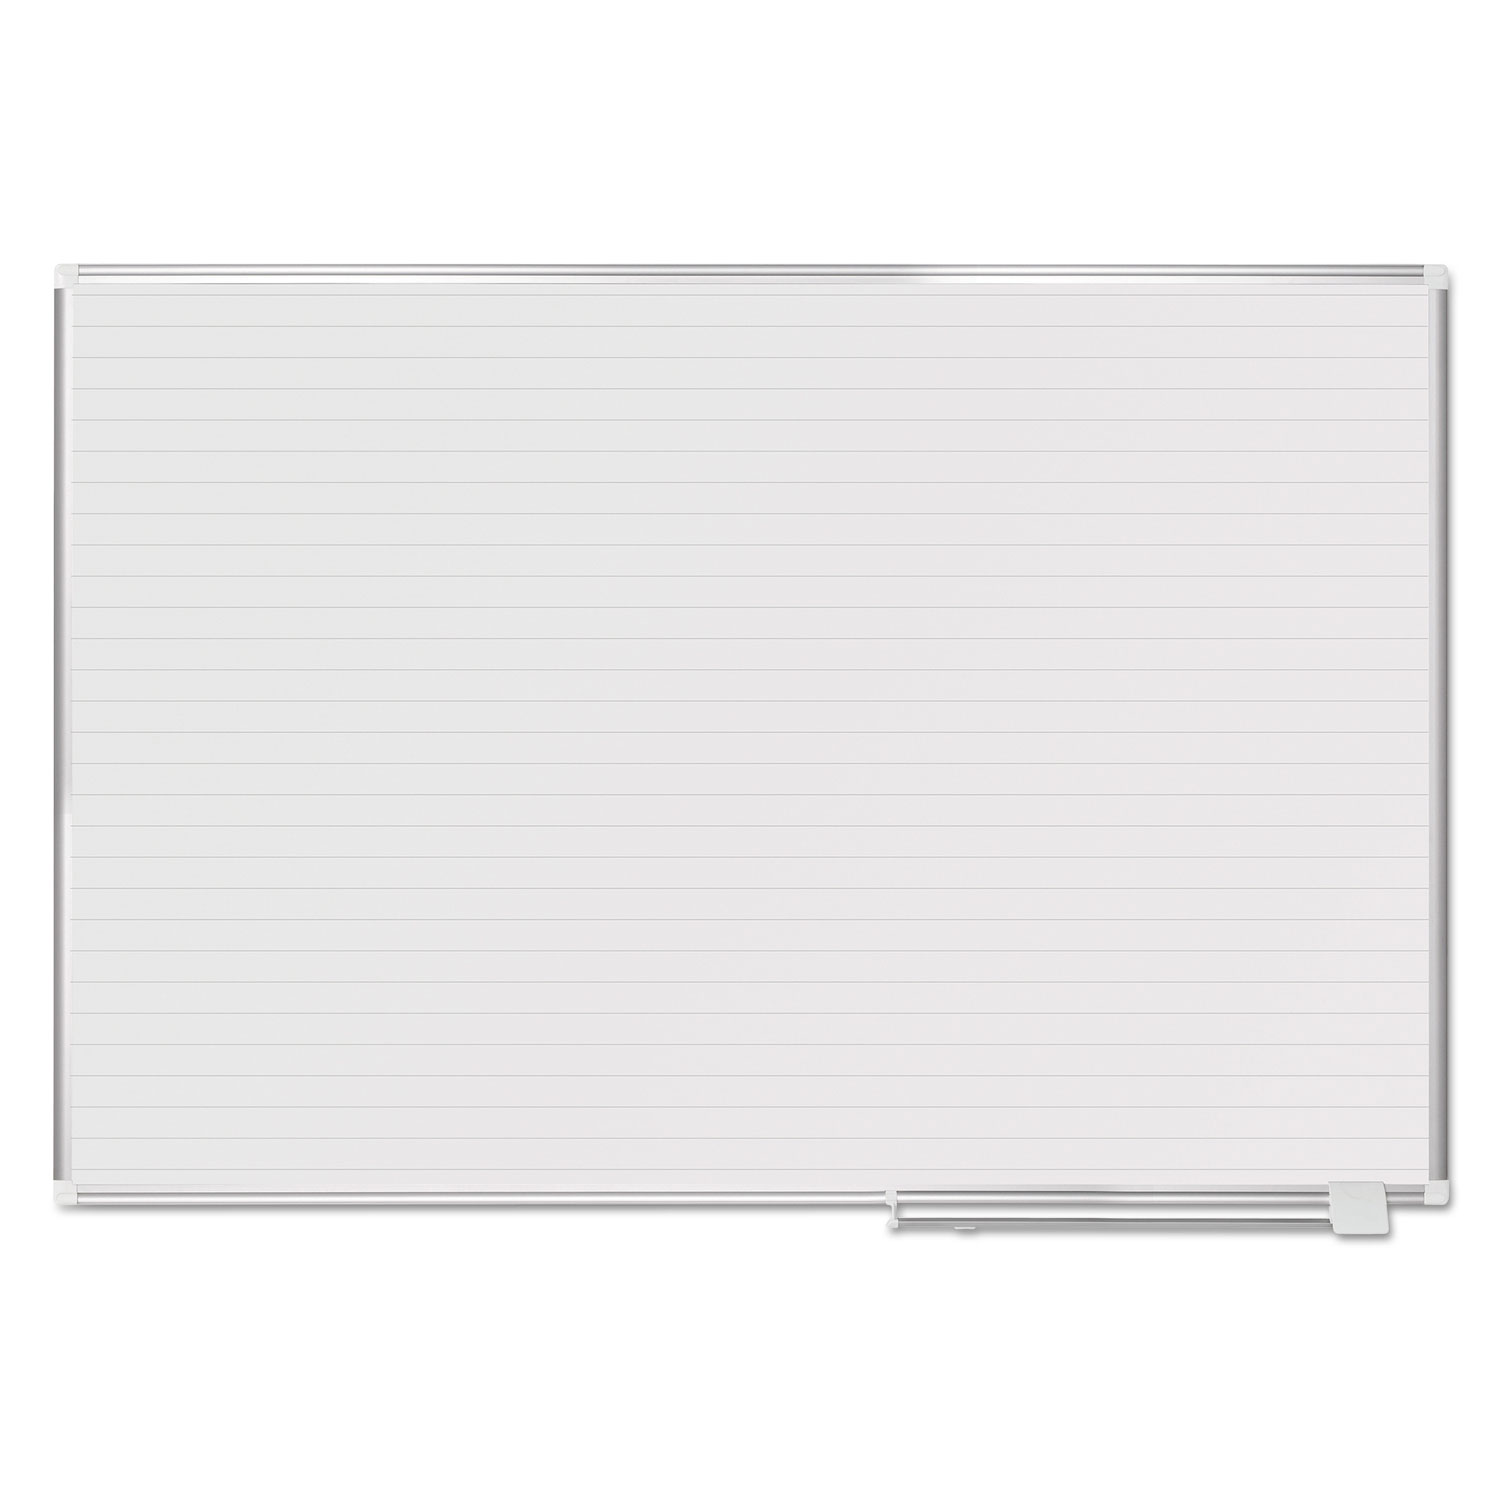  MasterVision MA2794830 Ruled Planning Board, 72 x 48, White/Silver (BVCMA2794830) 